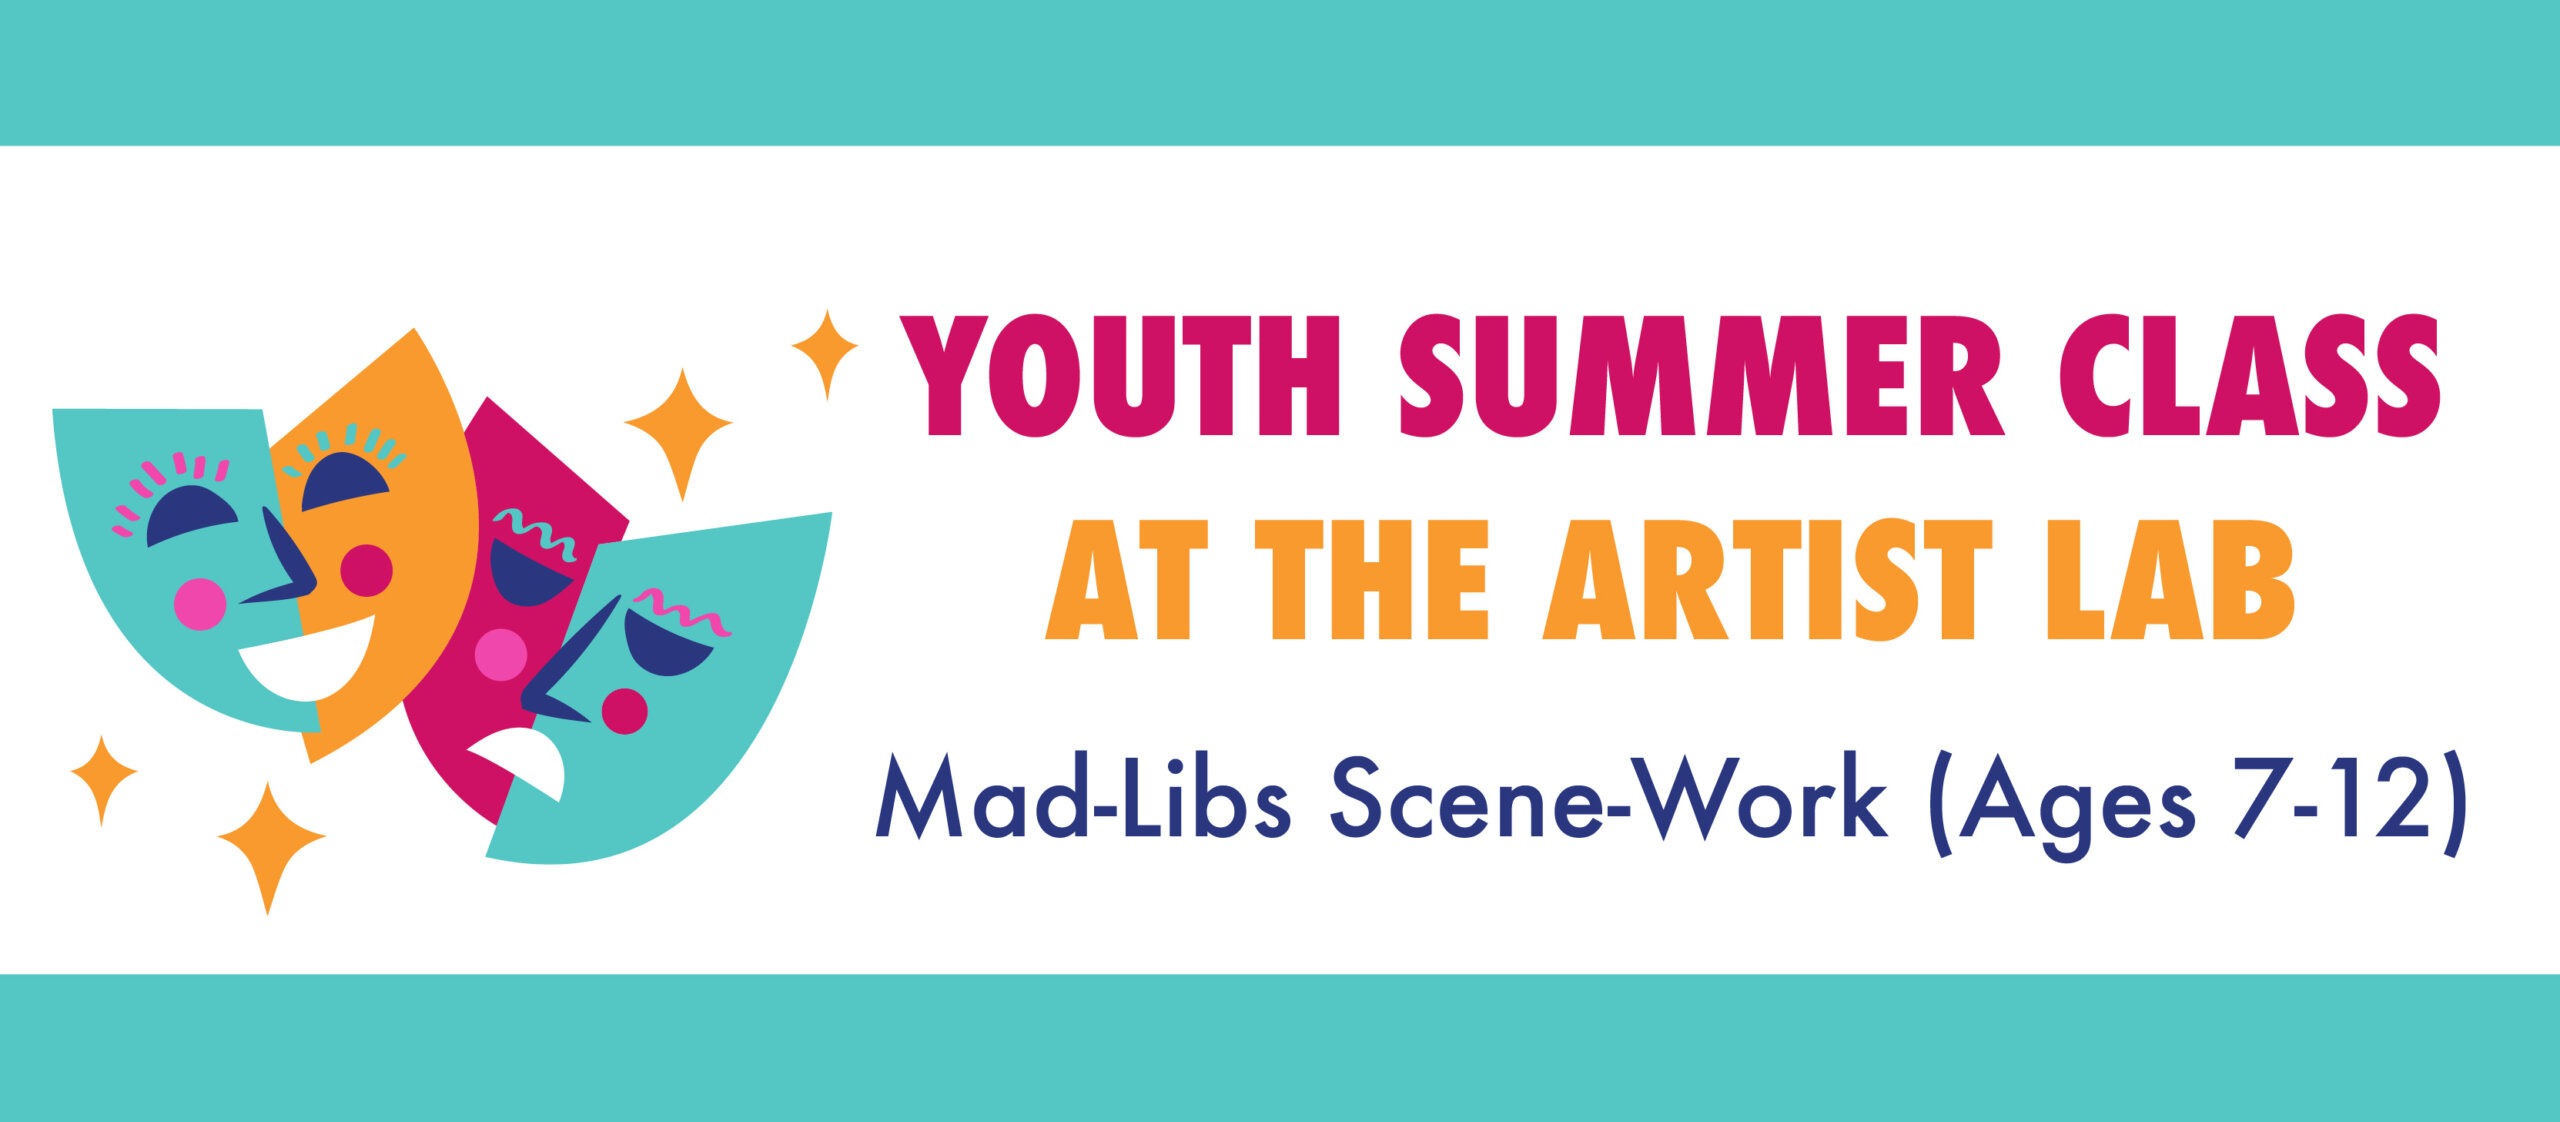 Artist Lab: Youth Summer Class Mad-Libs Scene-Work for Kids (Ages 7-12)